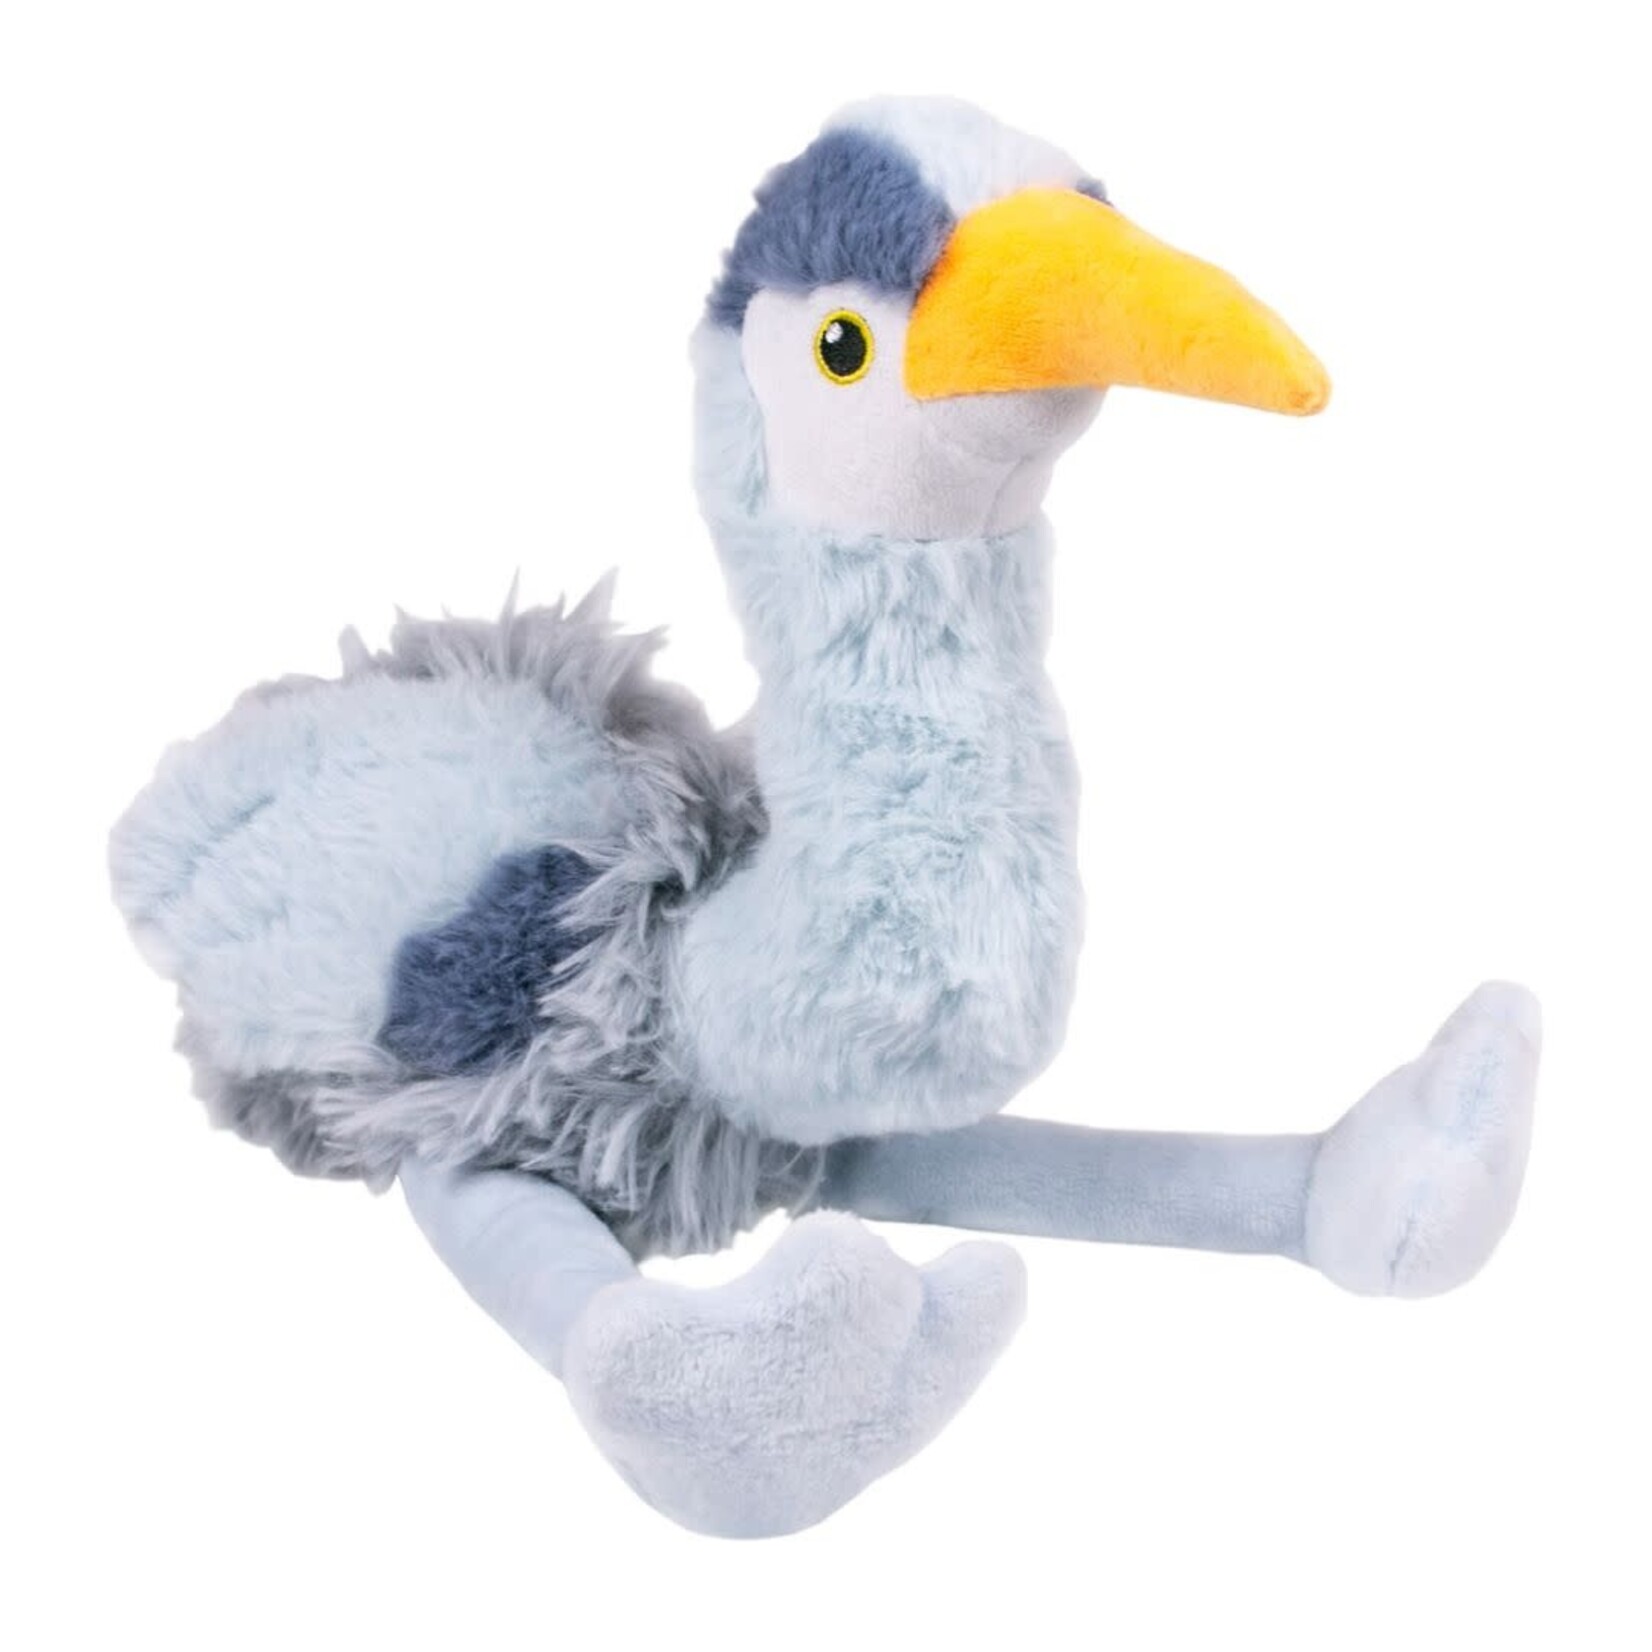 Tall Tails Tall Tails Plush Heron with Squeaker